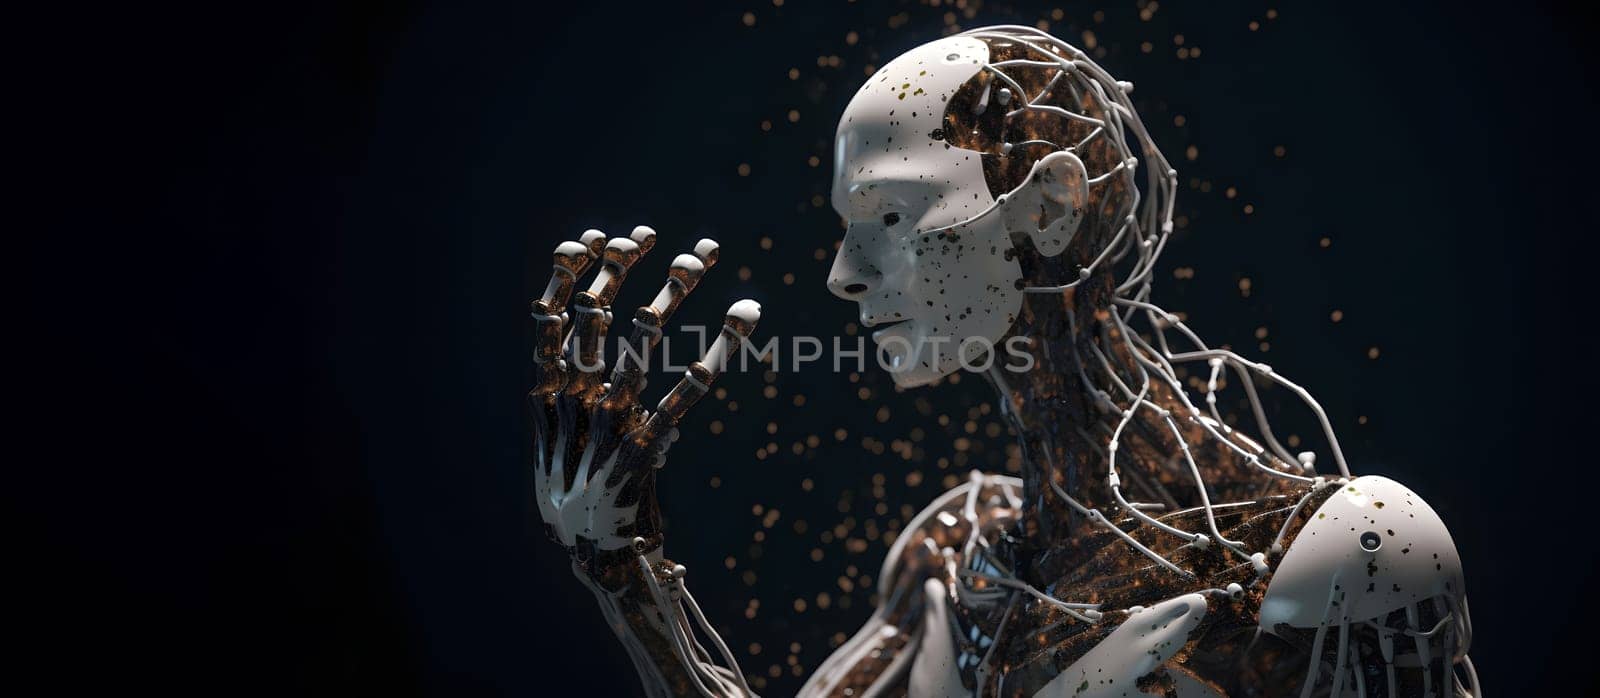 anthropomorphic humanoid robot looking on his hand on black background, neural network generated art. Digitally generated image. Not based on any actual person, scene or pattern.